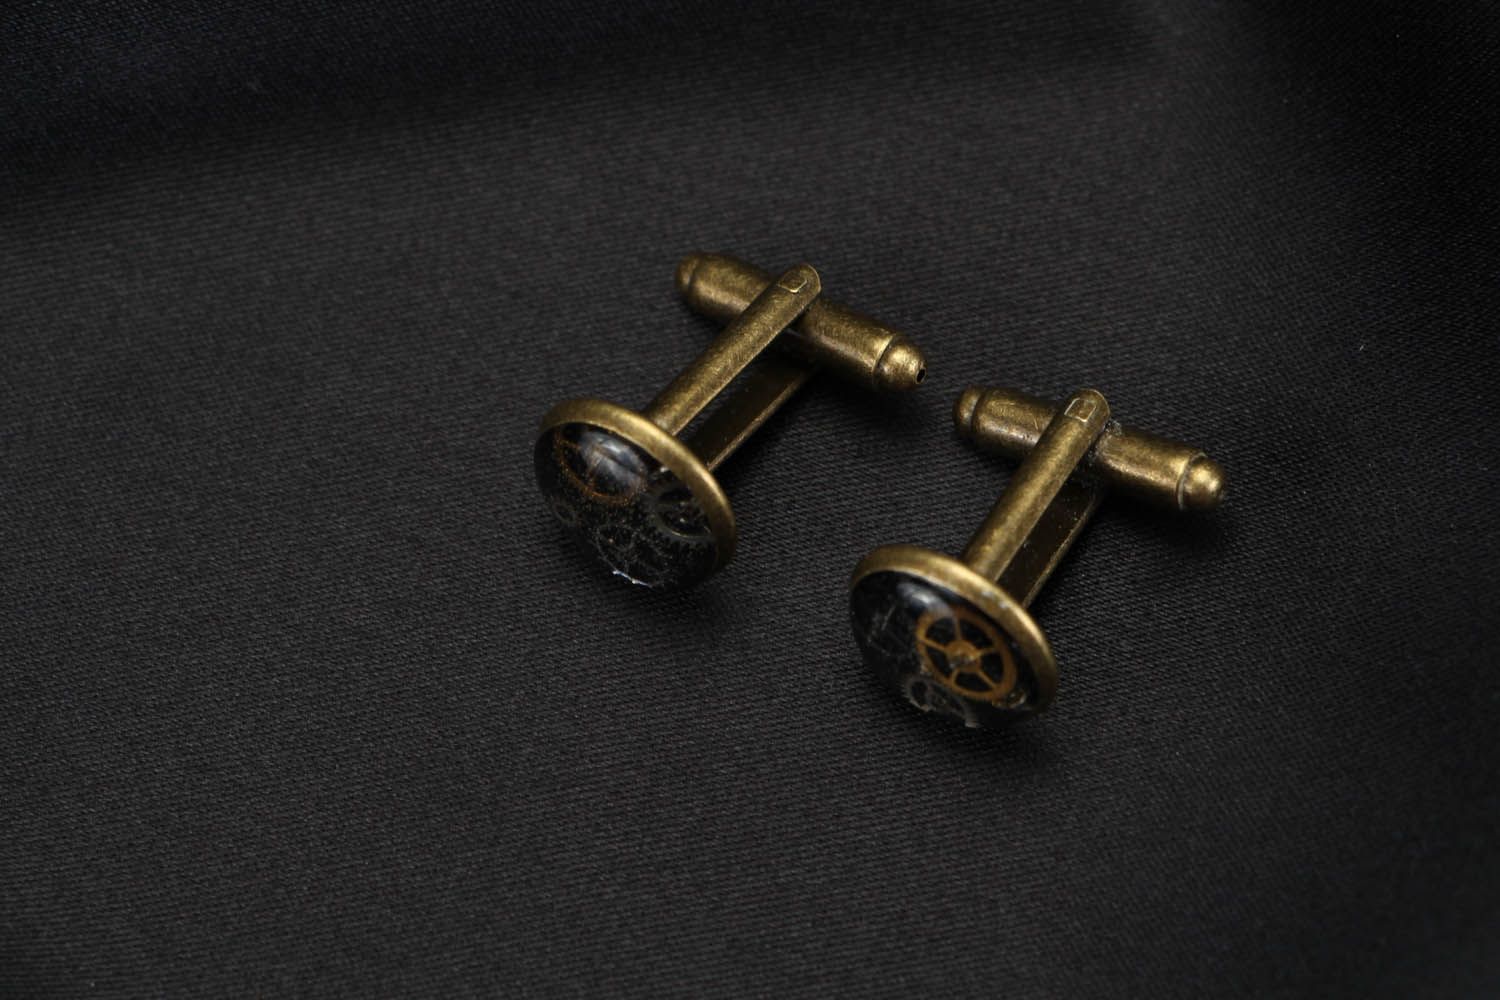 Cuff links with watch details in steam punk style photo 3